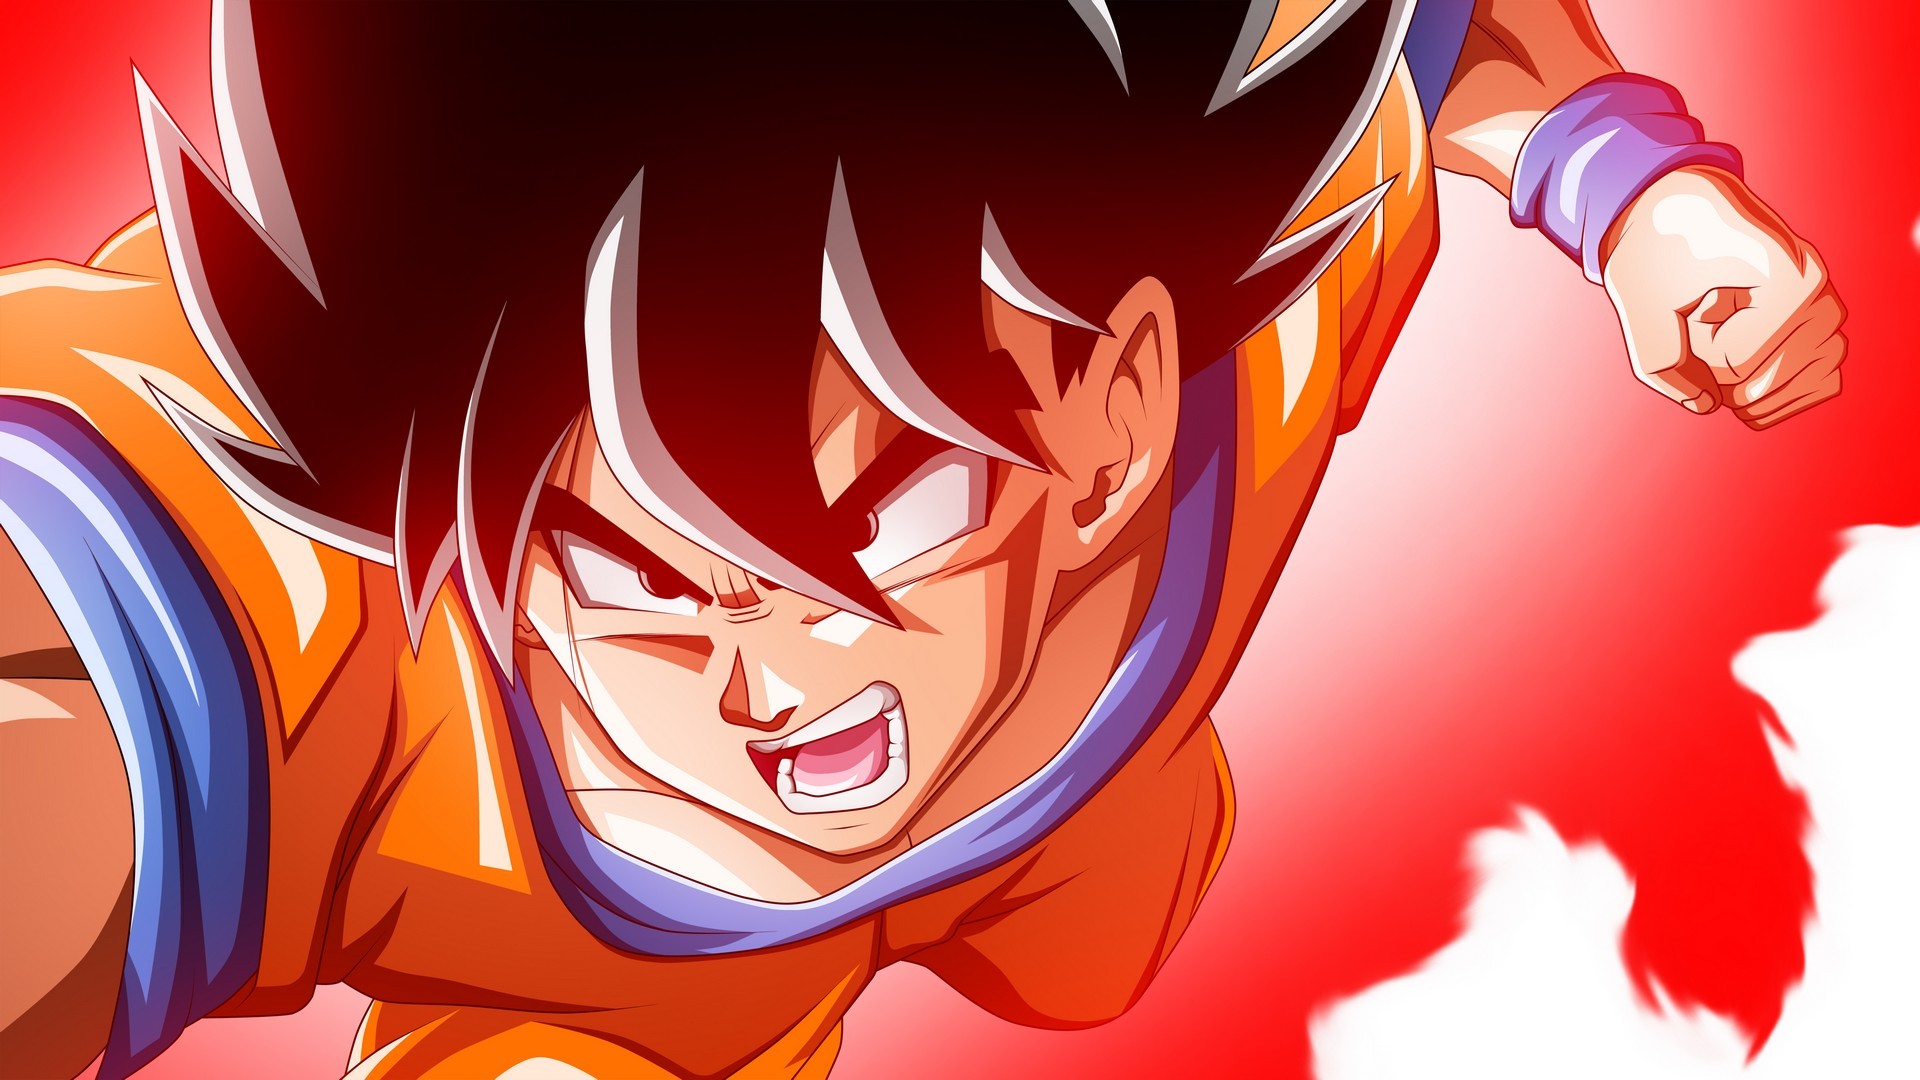 Goku Imagenes Desktop Backgrounds With Resolution 1920X1080 pixel. You can make this wallpaper for your Desktop Computer Backgrounds, Mac Wallpapers, Android Lock screen or iPhone Screensavers